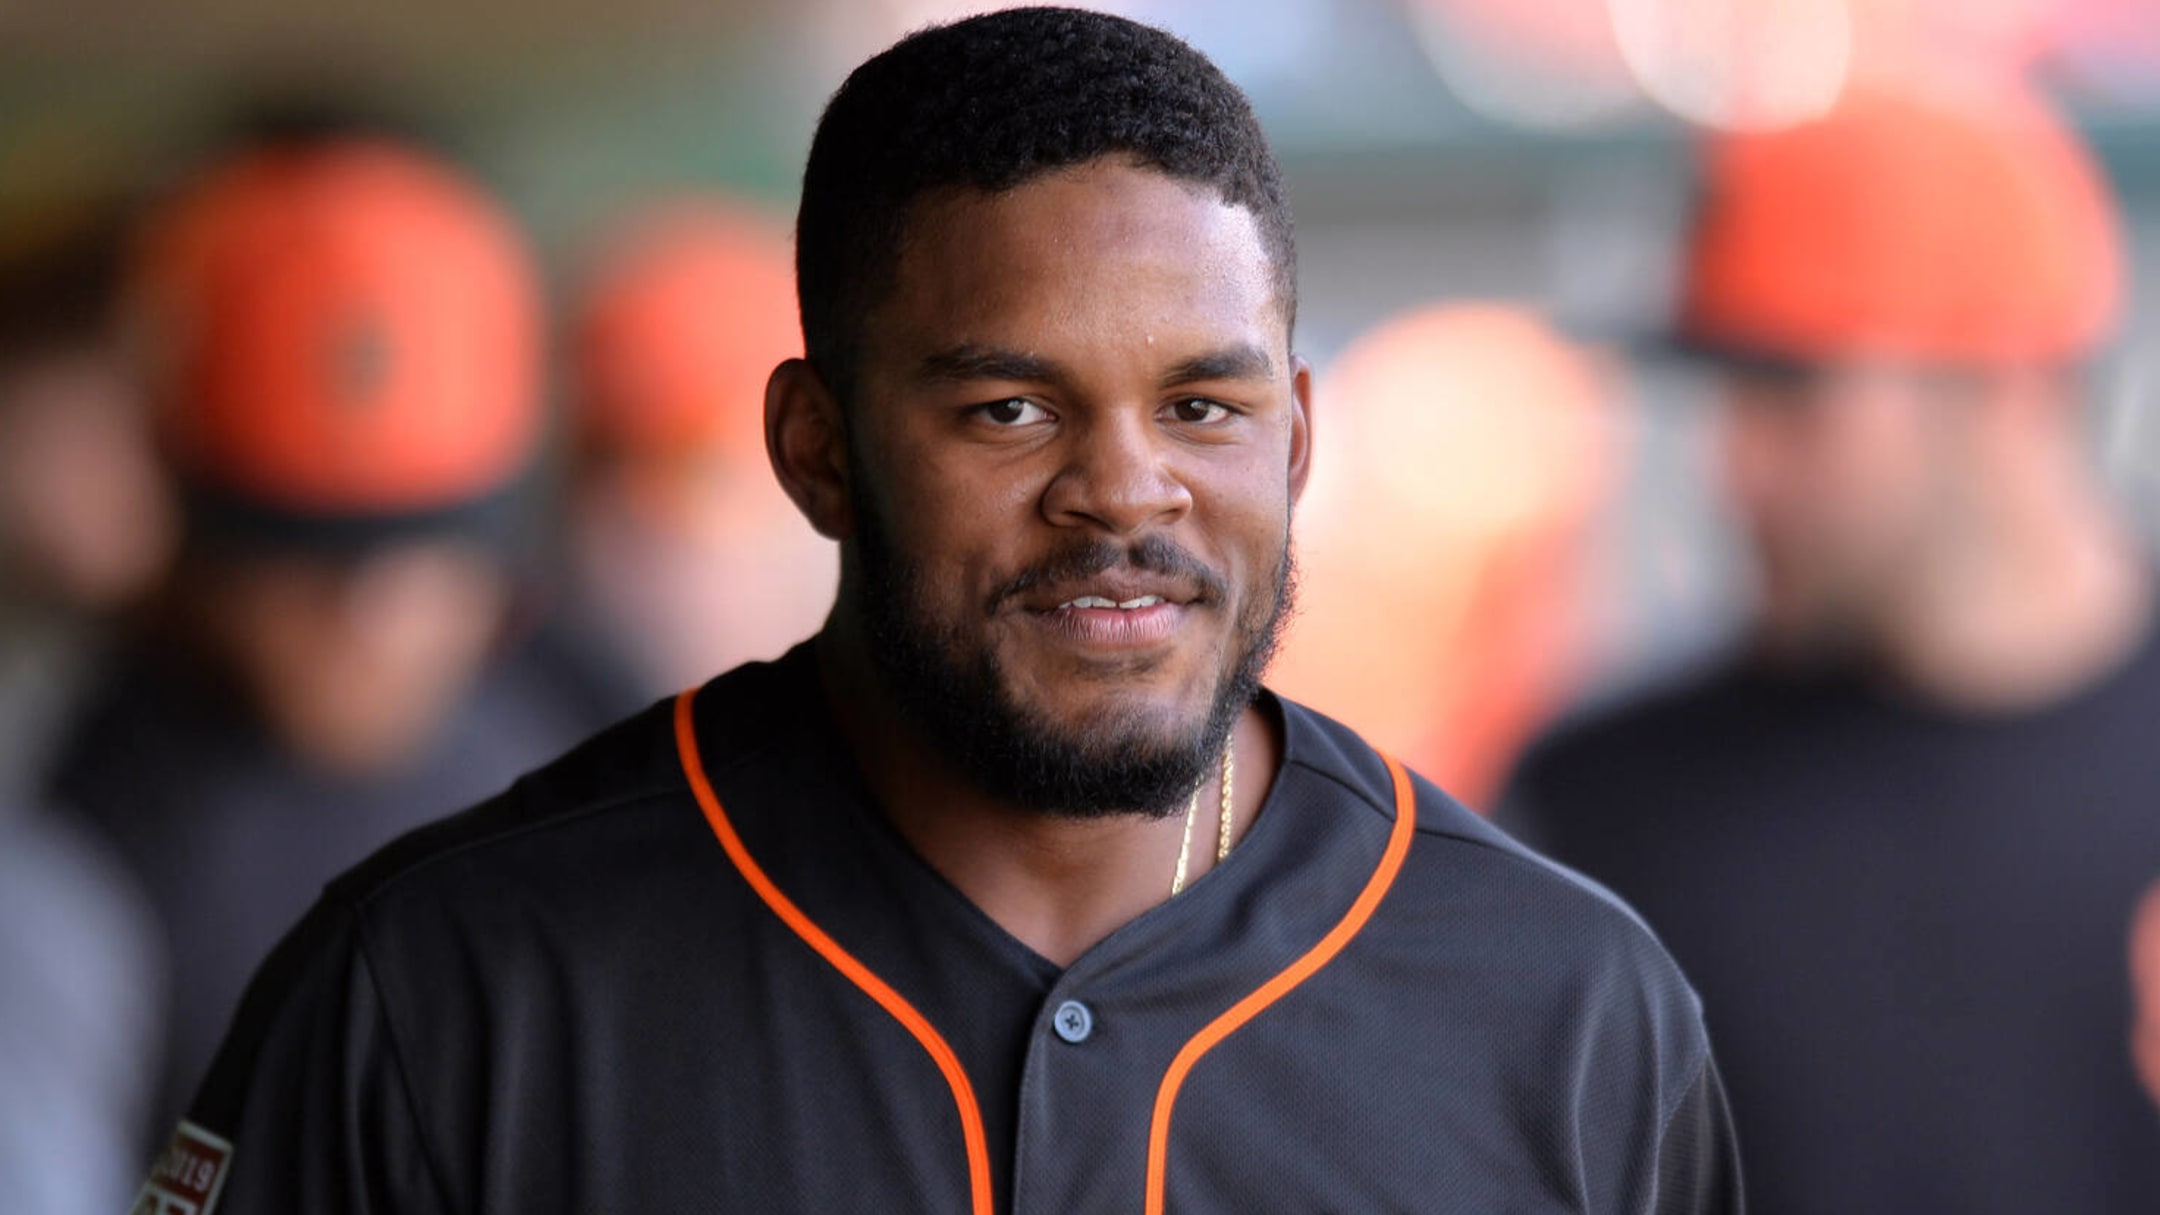 San Francisco Giants super prospect Heliot Ramos heads to the